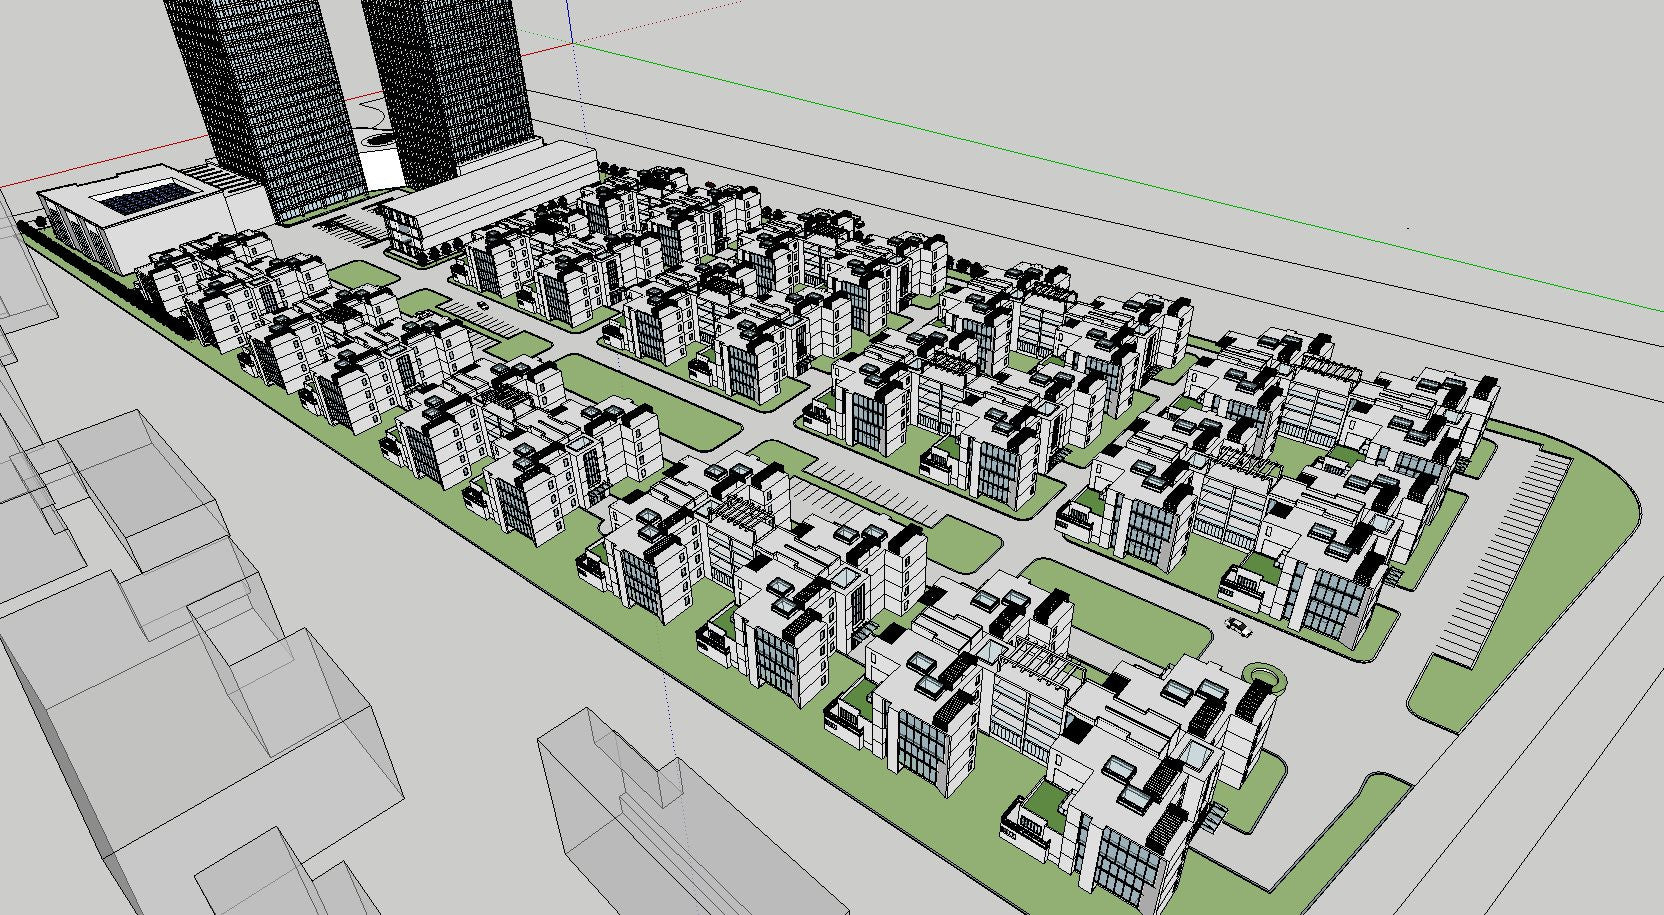 【10 Large-Scale Residential Construction and Landscape Sketchup Models】